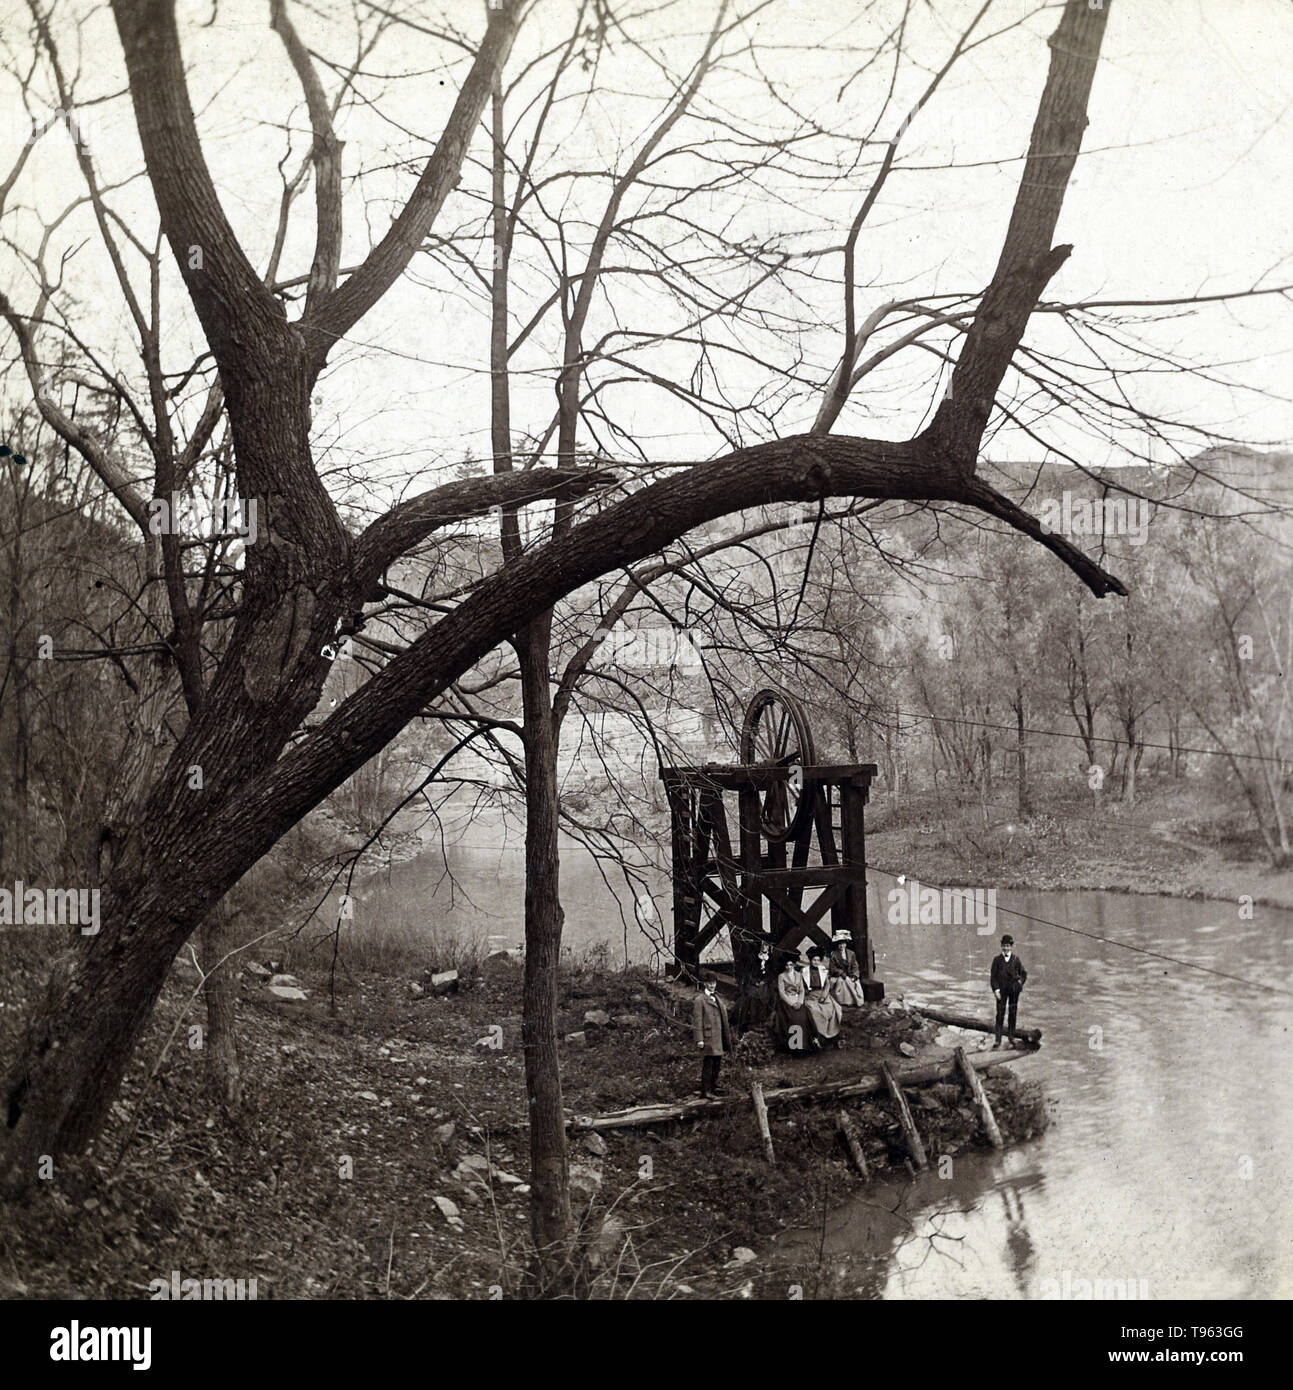 Pulley and cable for hand-pulled ferry on Kenwood Creek, Albany, New York, c. 1903. Julius M. Wendt (American, active 1900s - 1910s). Gelatin silver print. Stock Photo